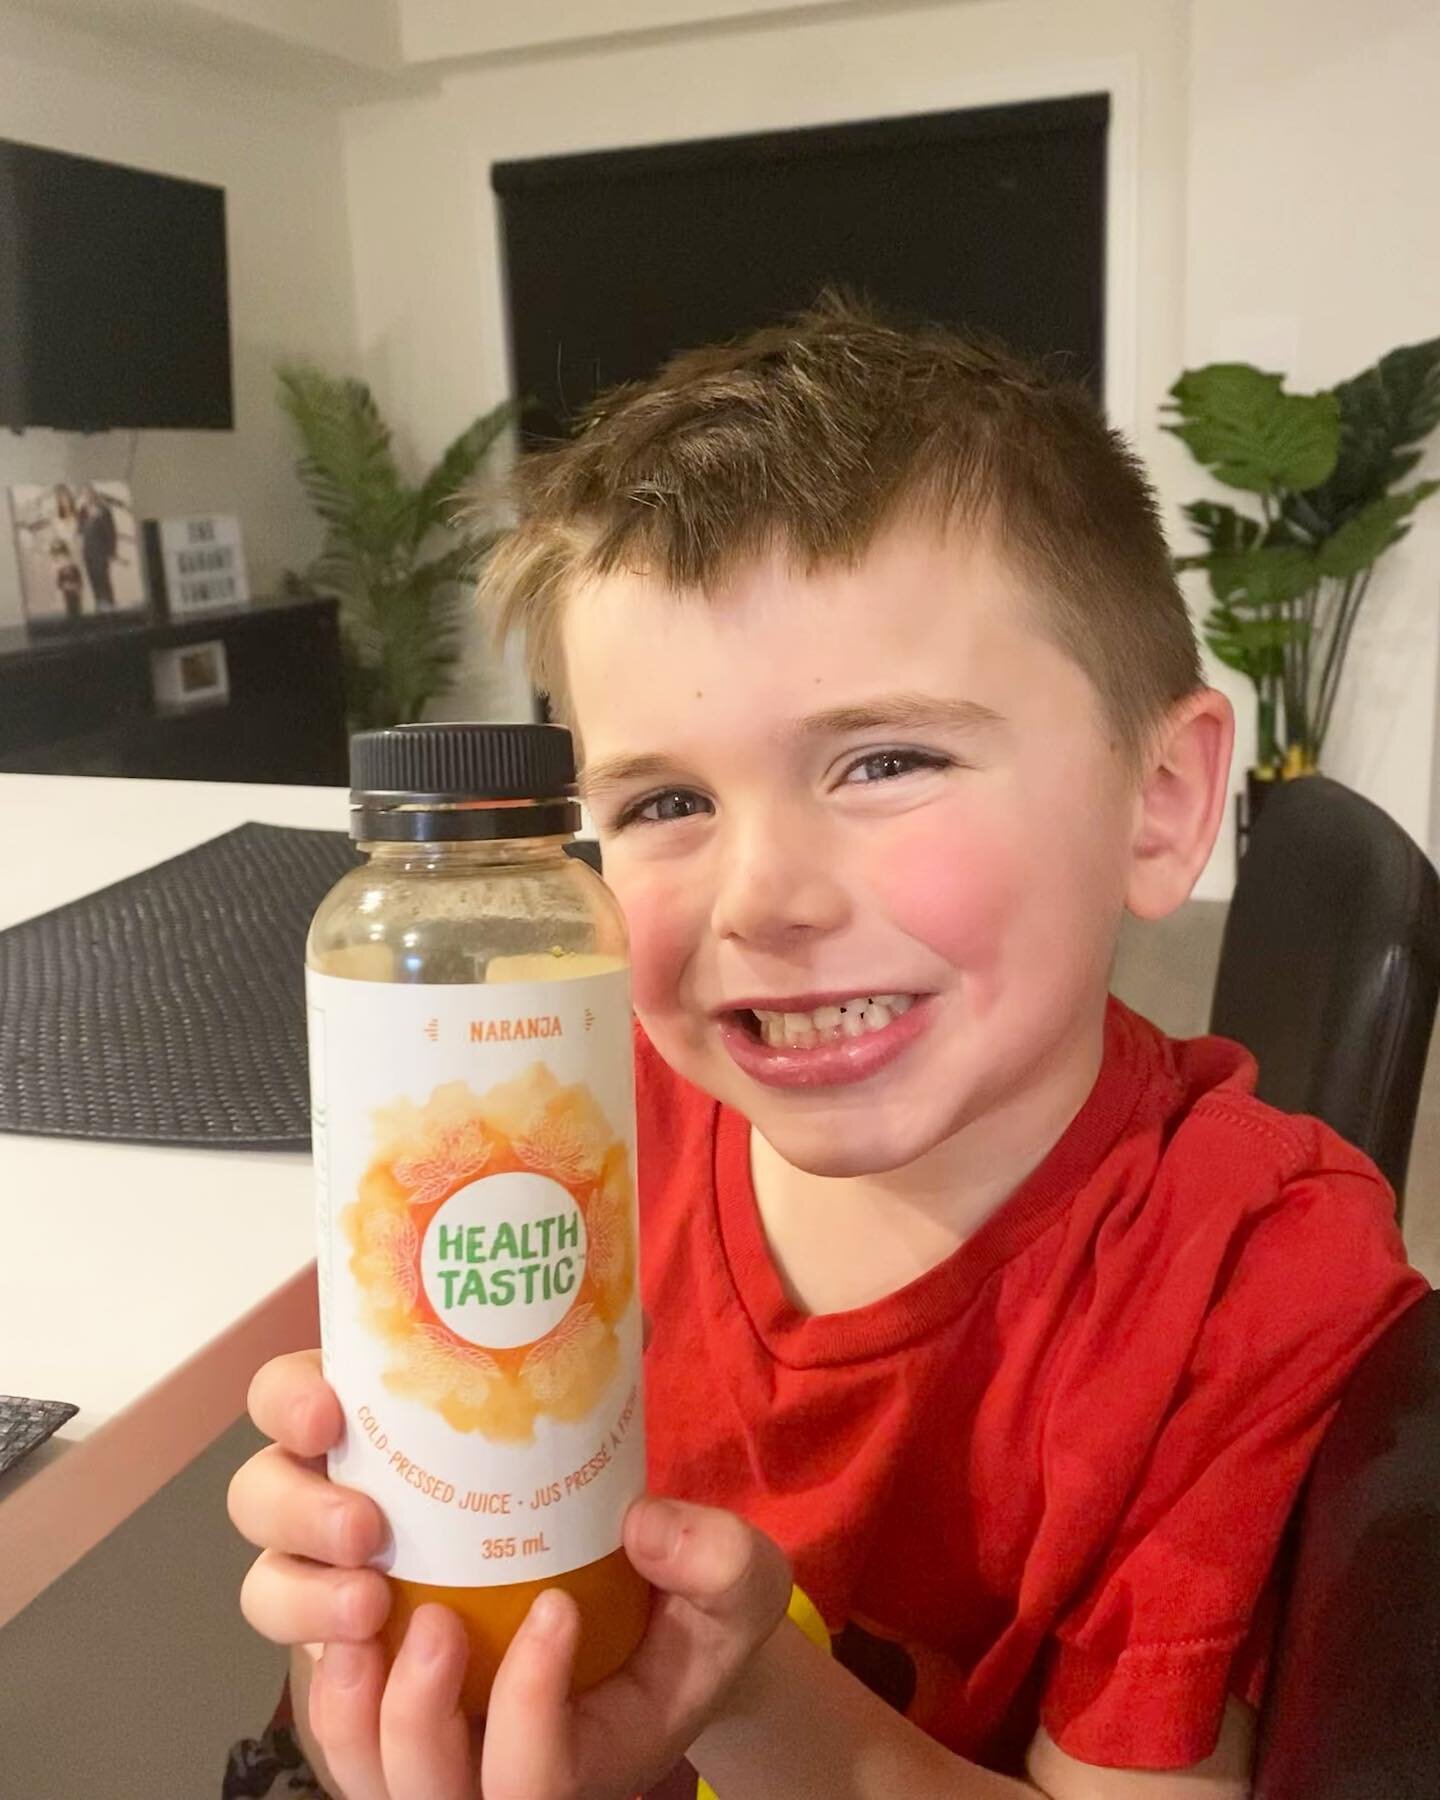 Children love our juices too! A great way to get all the nutrients they need 🧡

Naranja offers: 

&bull; Immune boost 
&bull; Vitamin C + A 
&bull; Skin health 
&bull; Boosts heart health 
&bull; Improve liver function 
&bull; &amp; More!